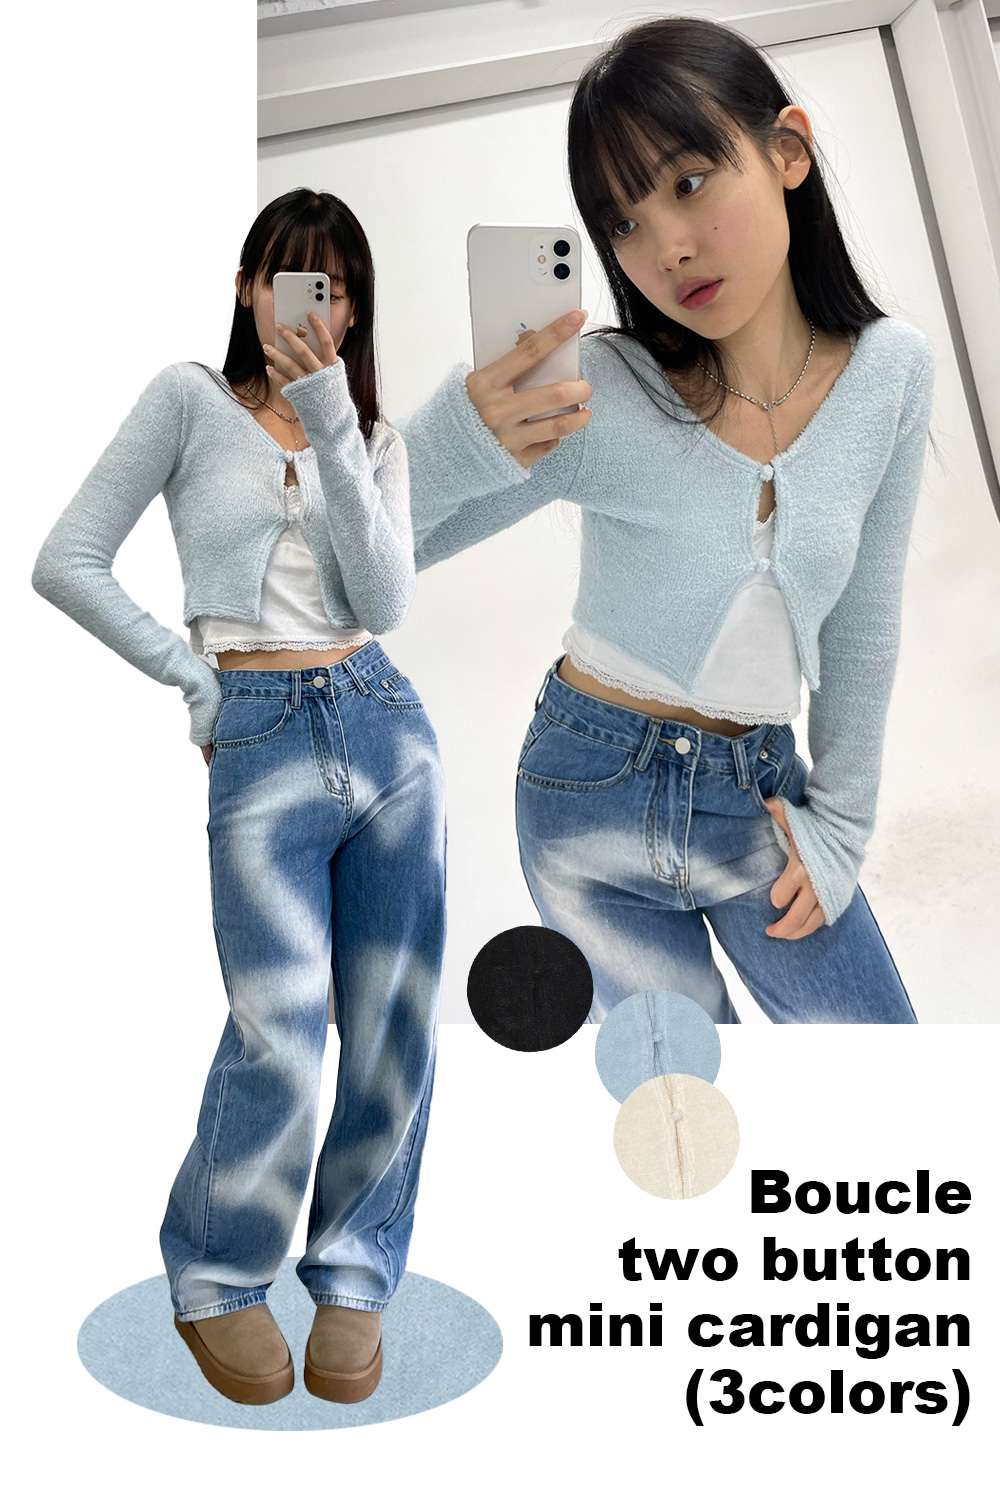 boucle two button mini cardigan (3colors)